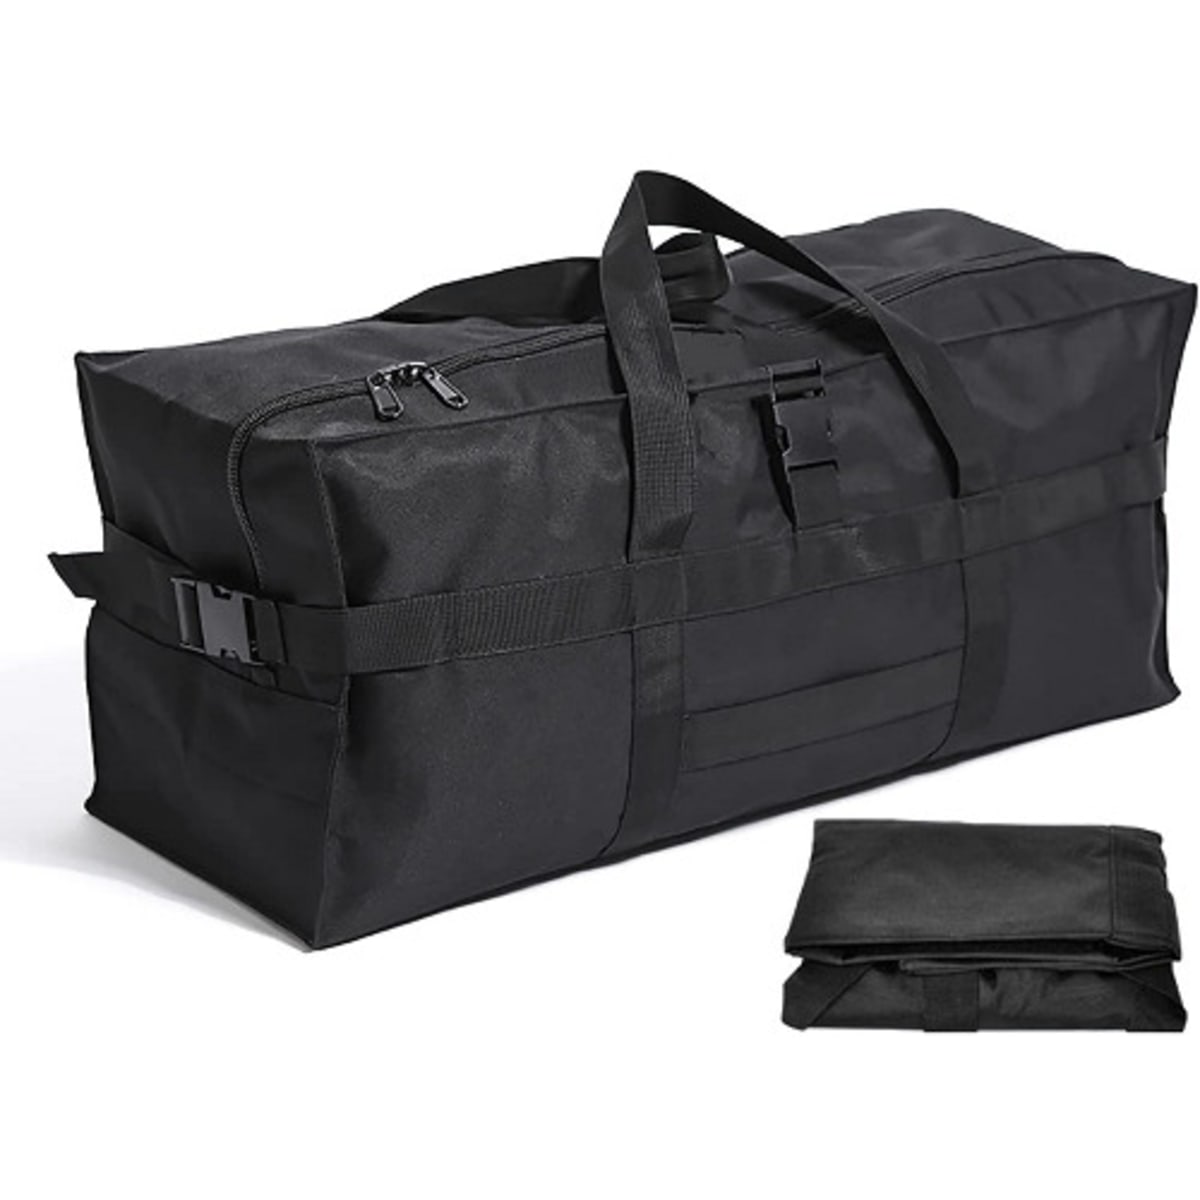 Large Capacity Travel Bag Wheels | Oxford Cloth Air Carrier Package -  Oxford Cloth - Aliexpress